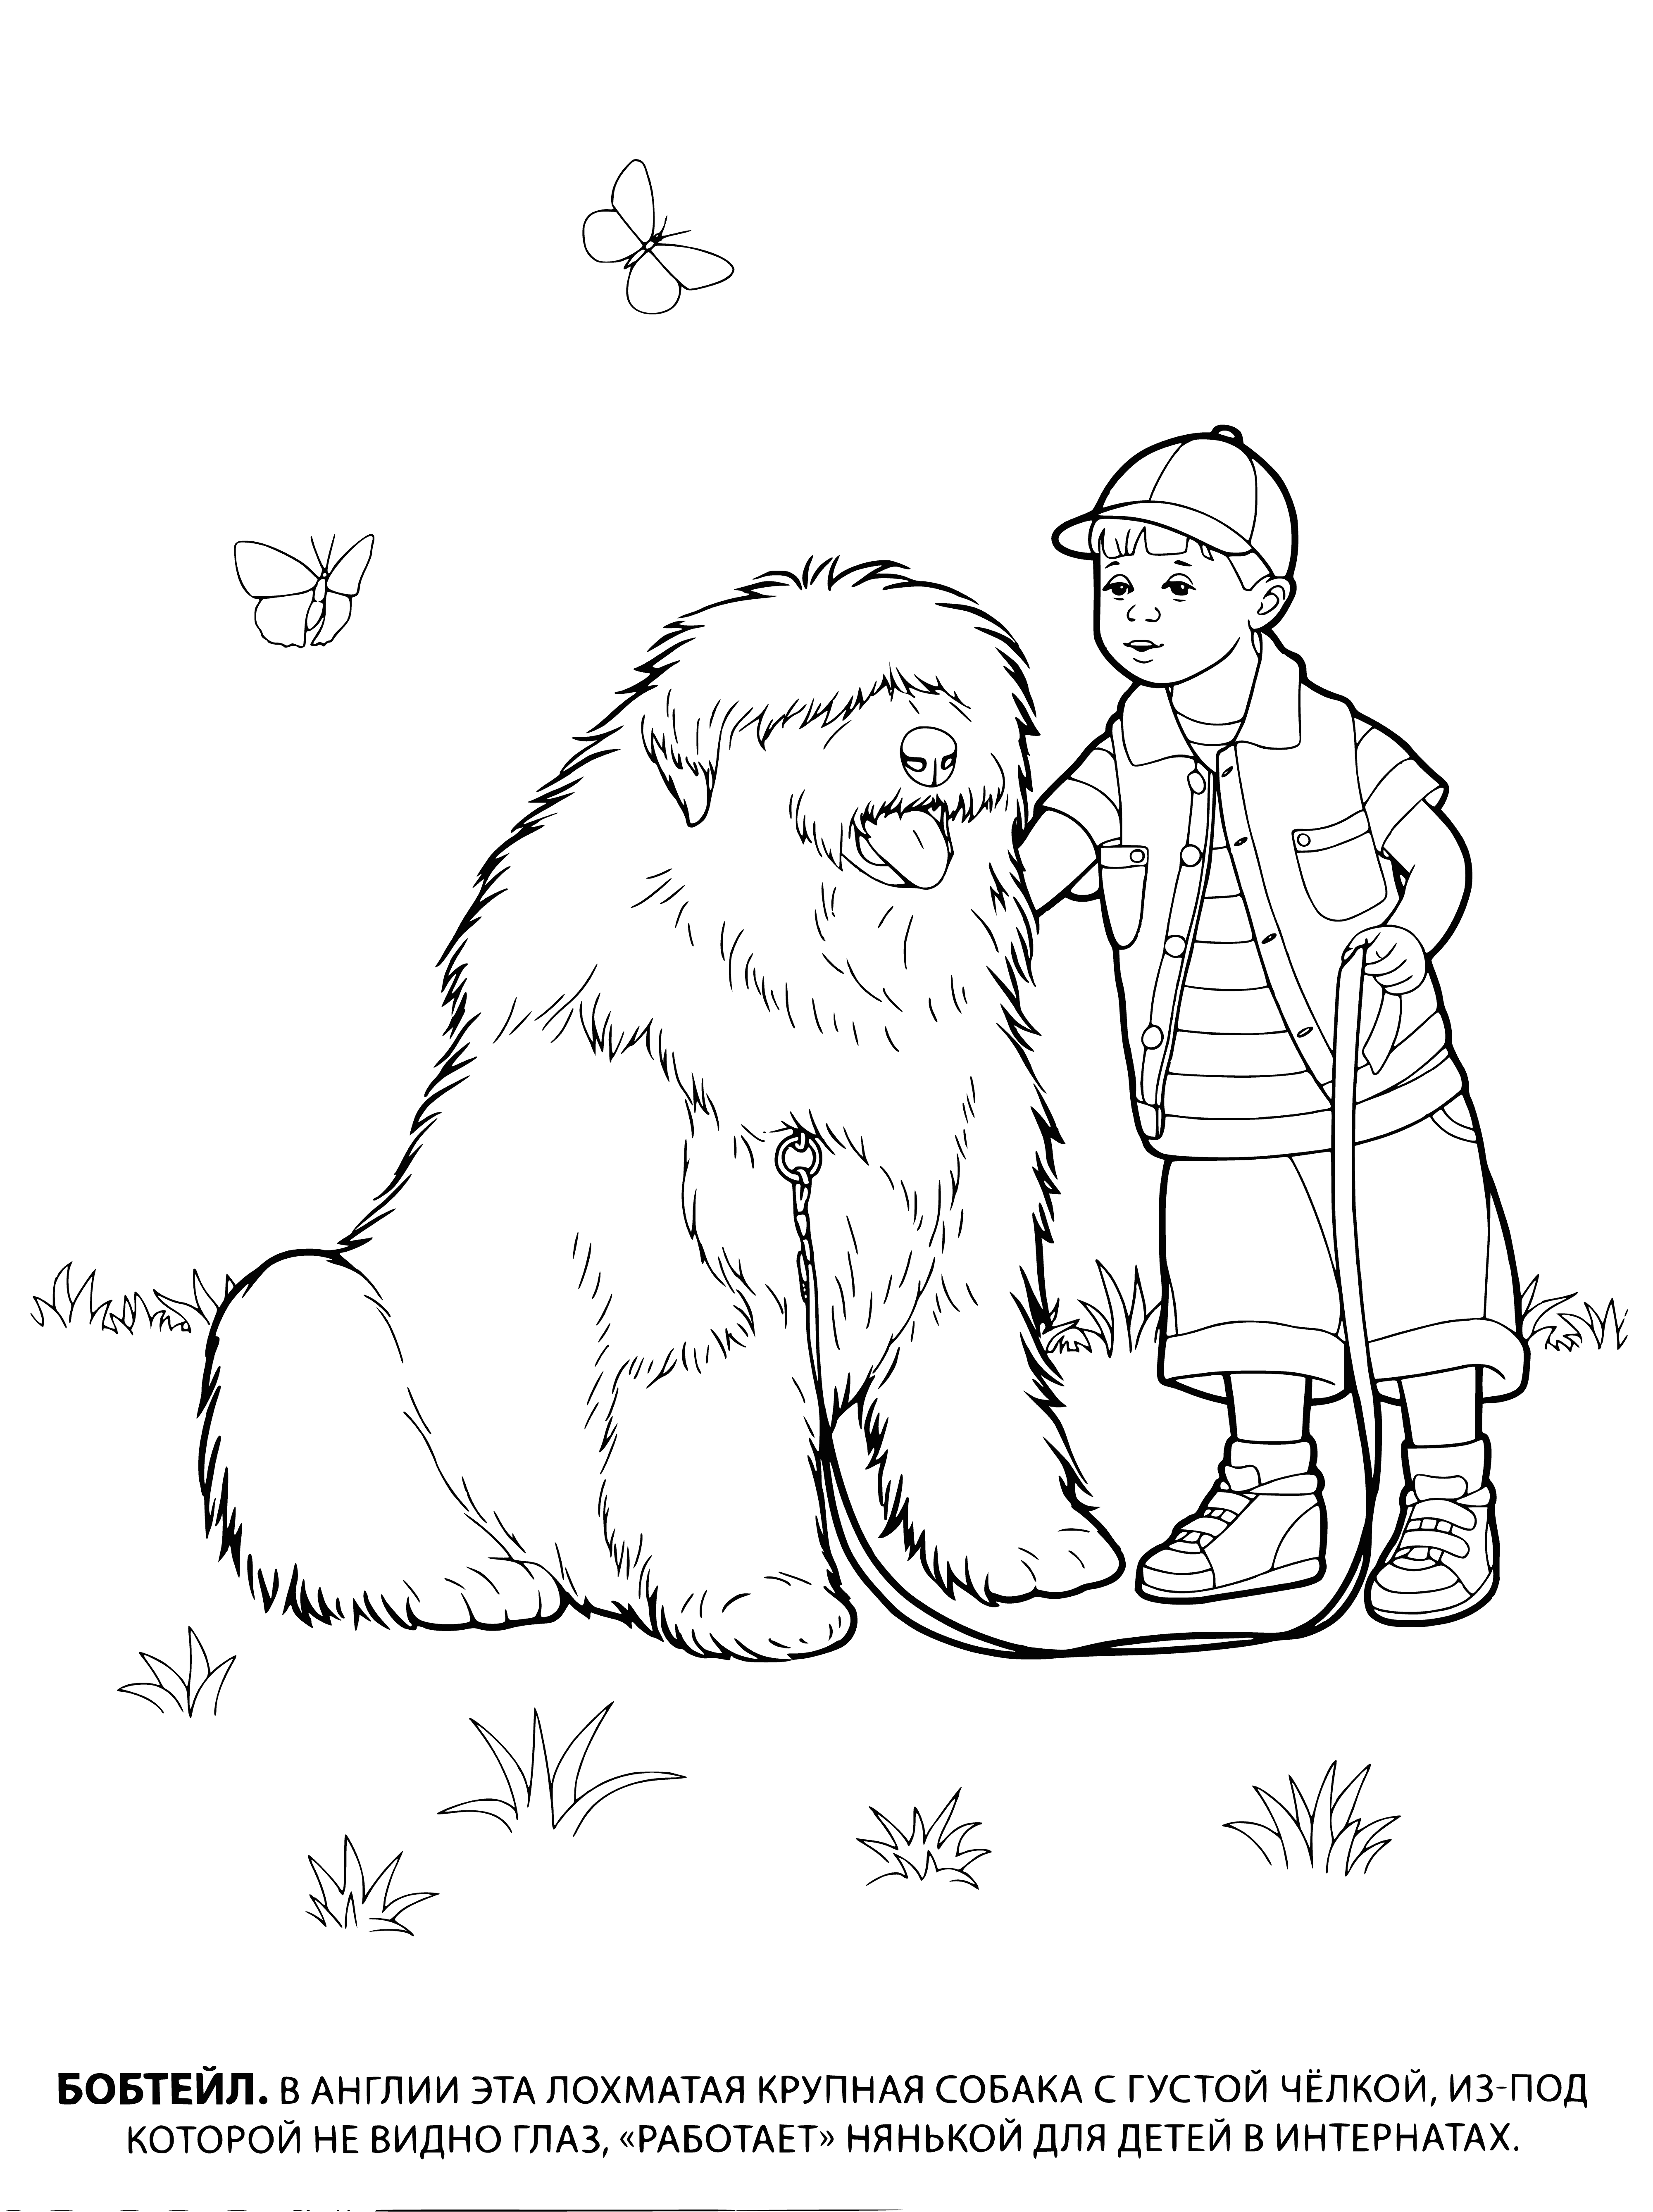 coloring page: Small dog with a docked tail, erect ears, Brown/Black coat, fox-like face, muscular hindquarters and broad chest.